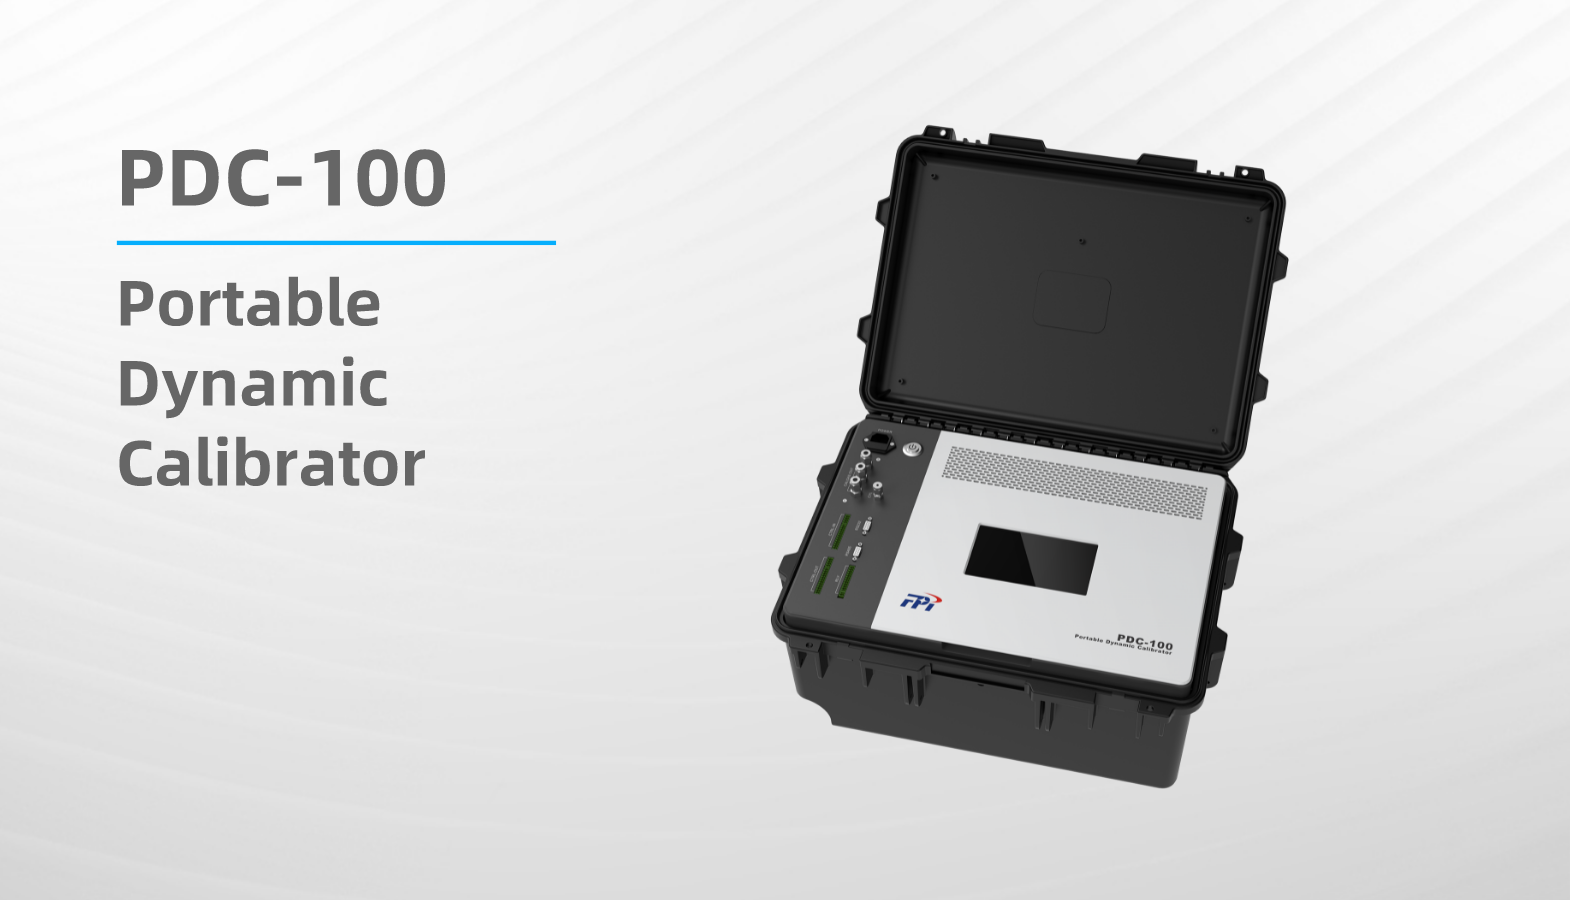 FPI Newly Launches PDC-100 Portable Dynamic Calibrator